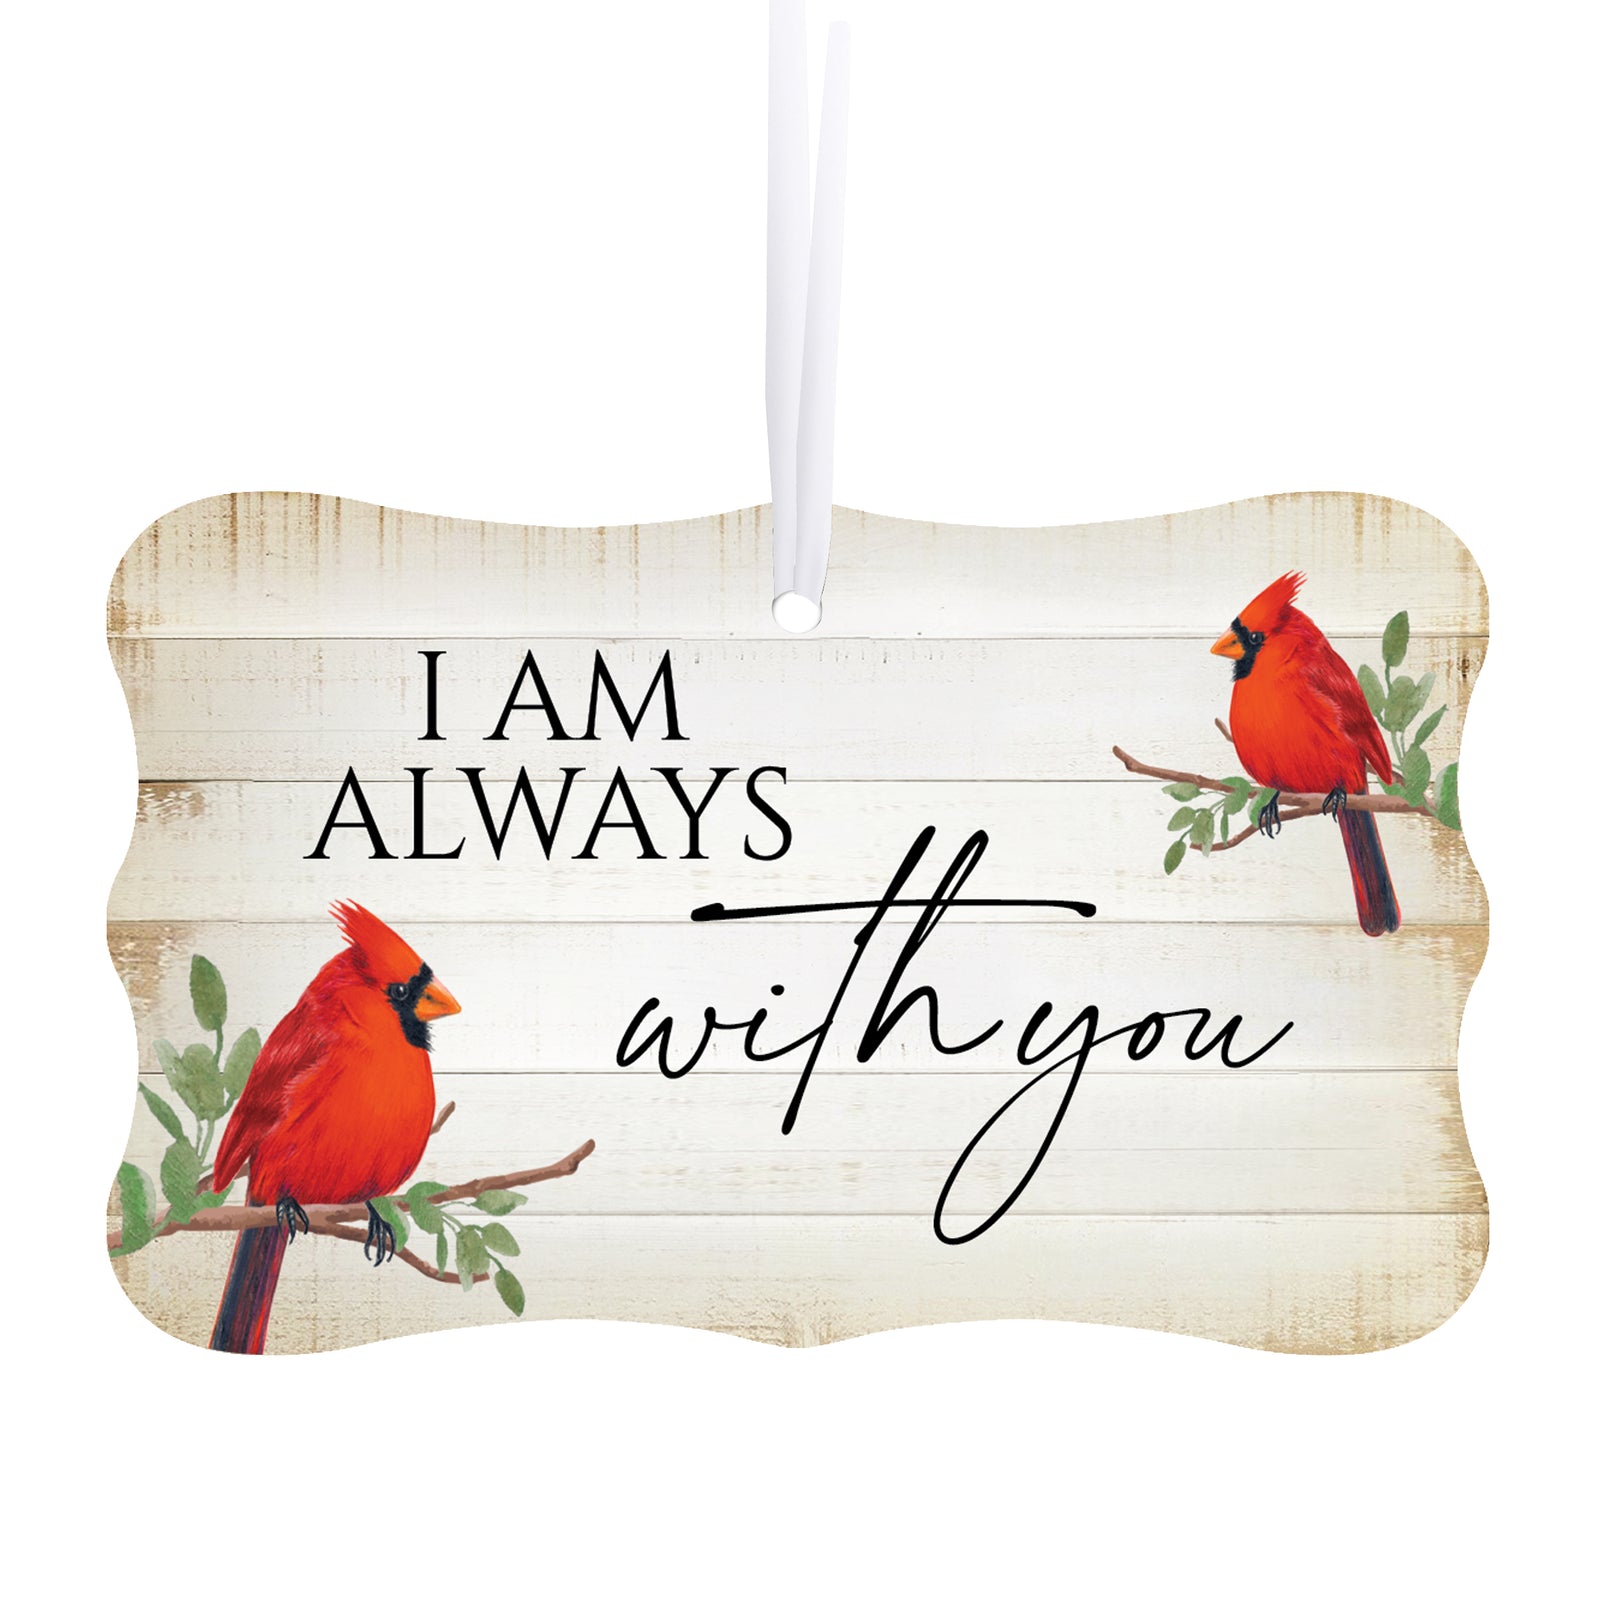 Rustic Scalloped Cardinal Wooden Ornament With Everyday Verses Gift Ideas - I Am Always